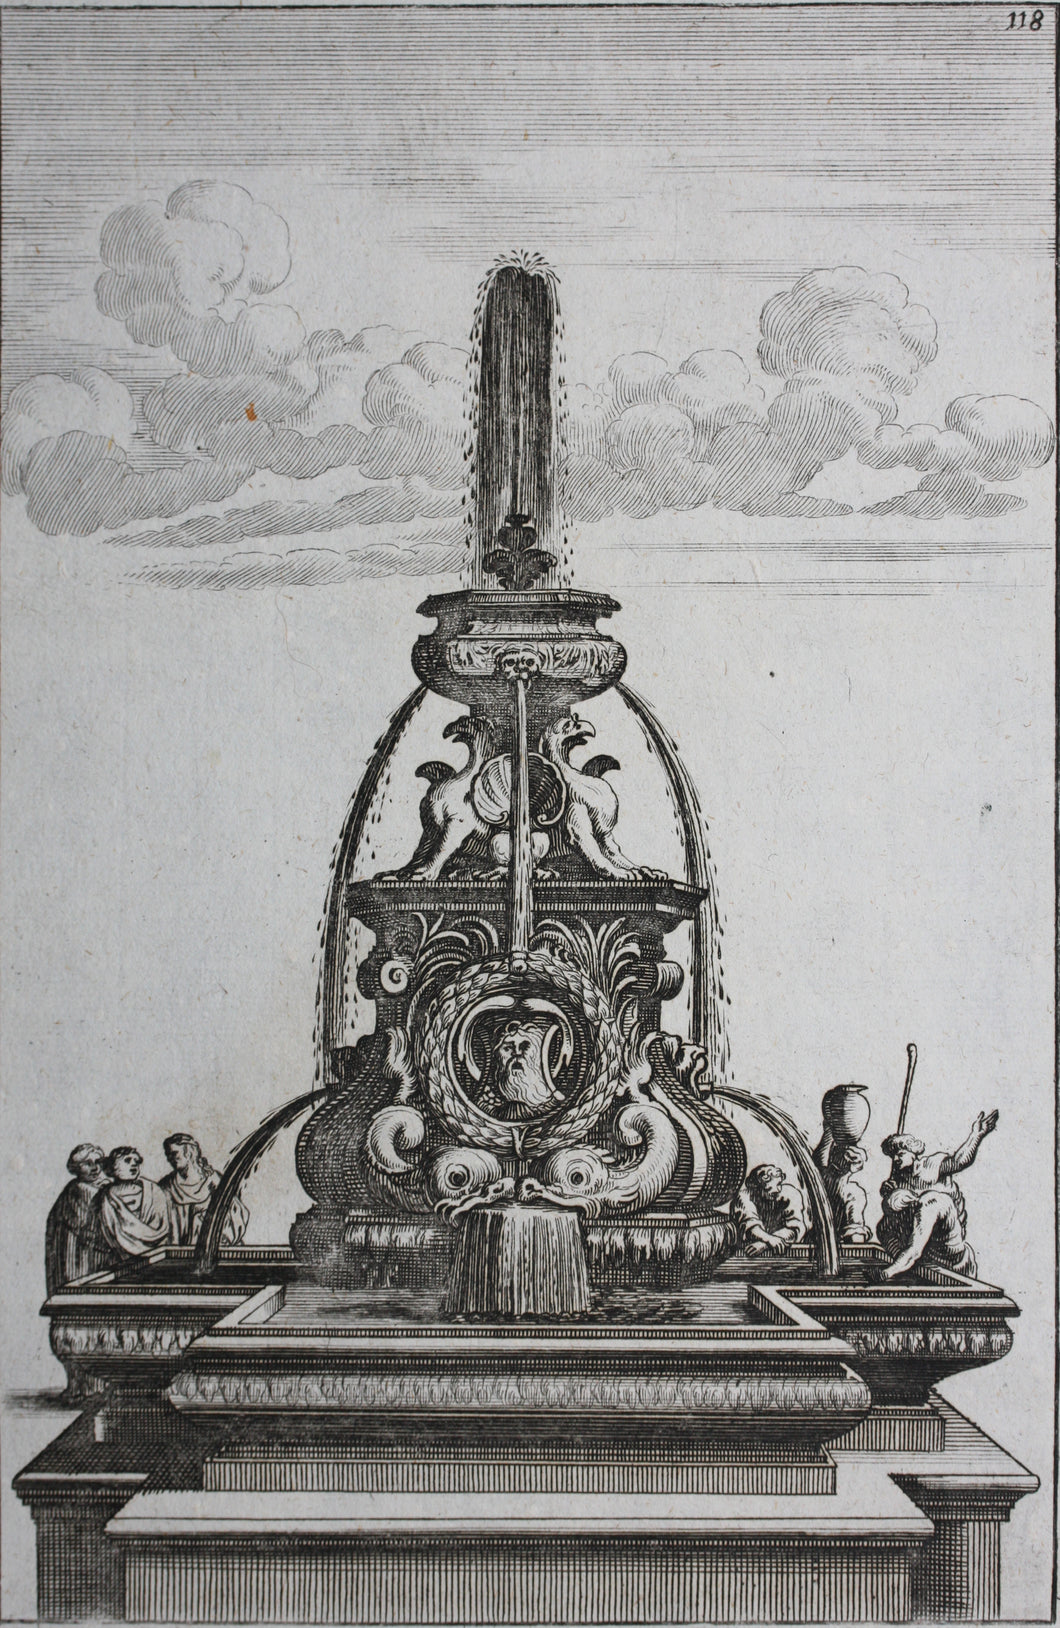 Georg Andreas Bockler. French Fountain. Engraving #118. 1664.